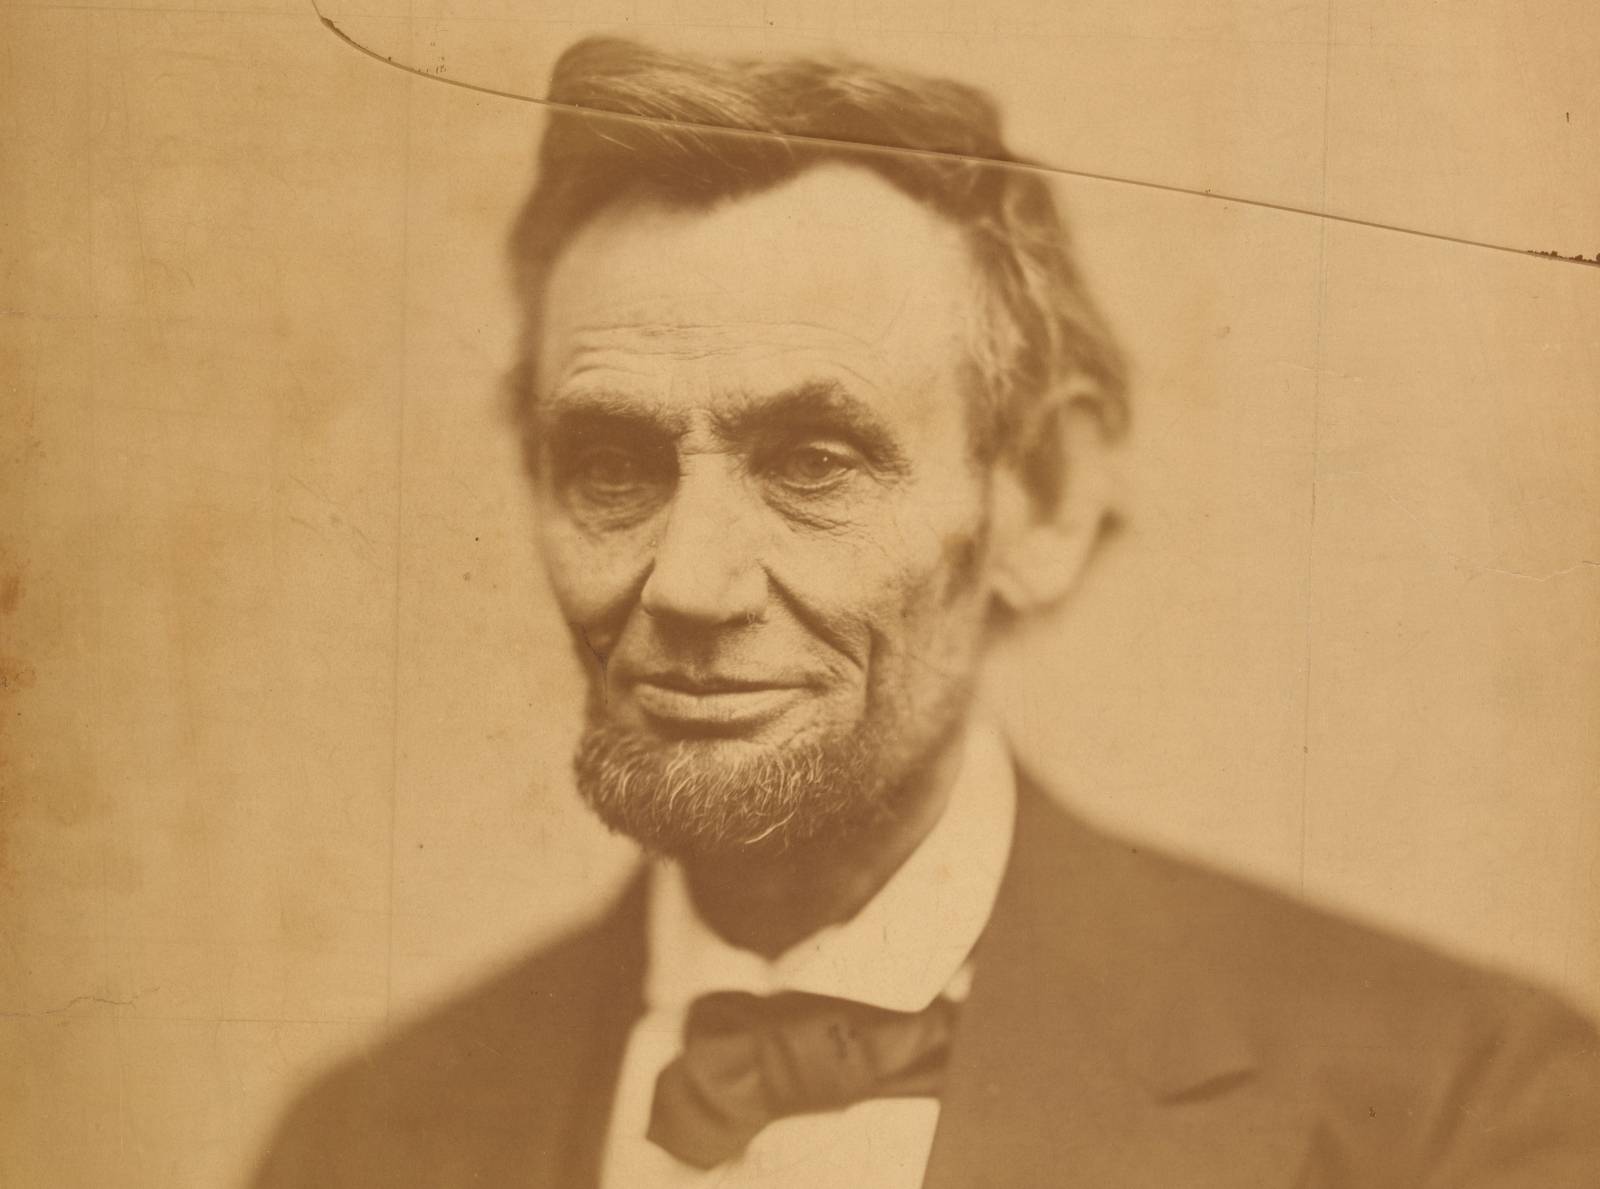 U.S. President Abraham Lincoln is seen in February 1865, just two months before his assassination